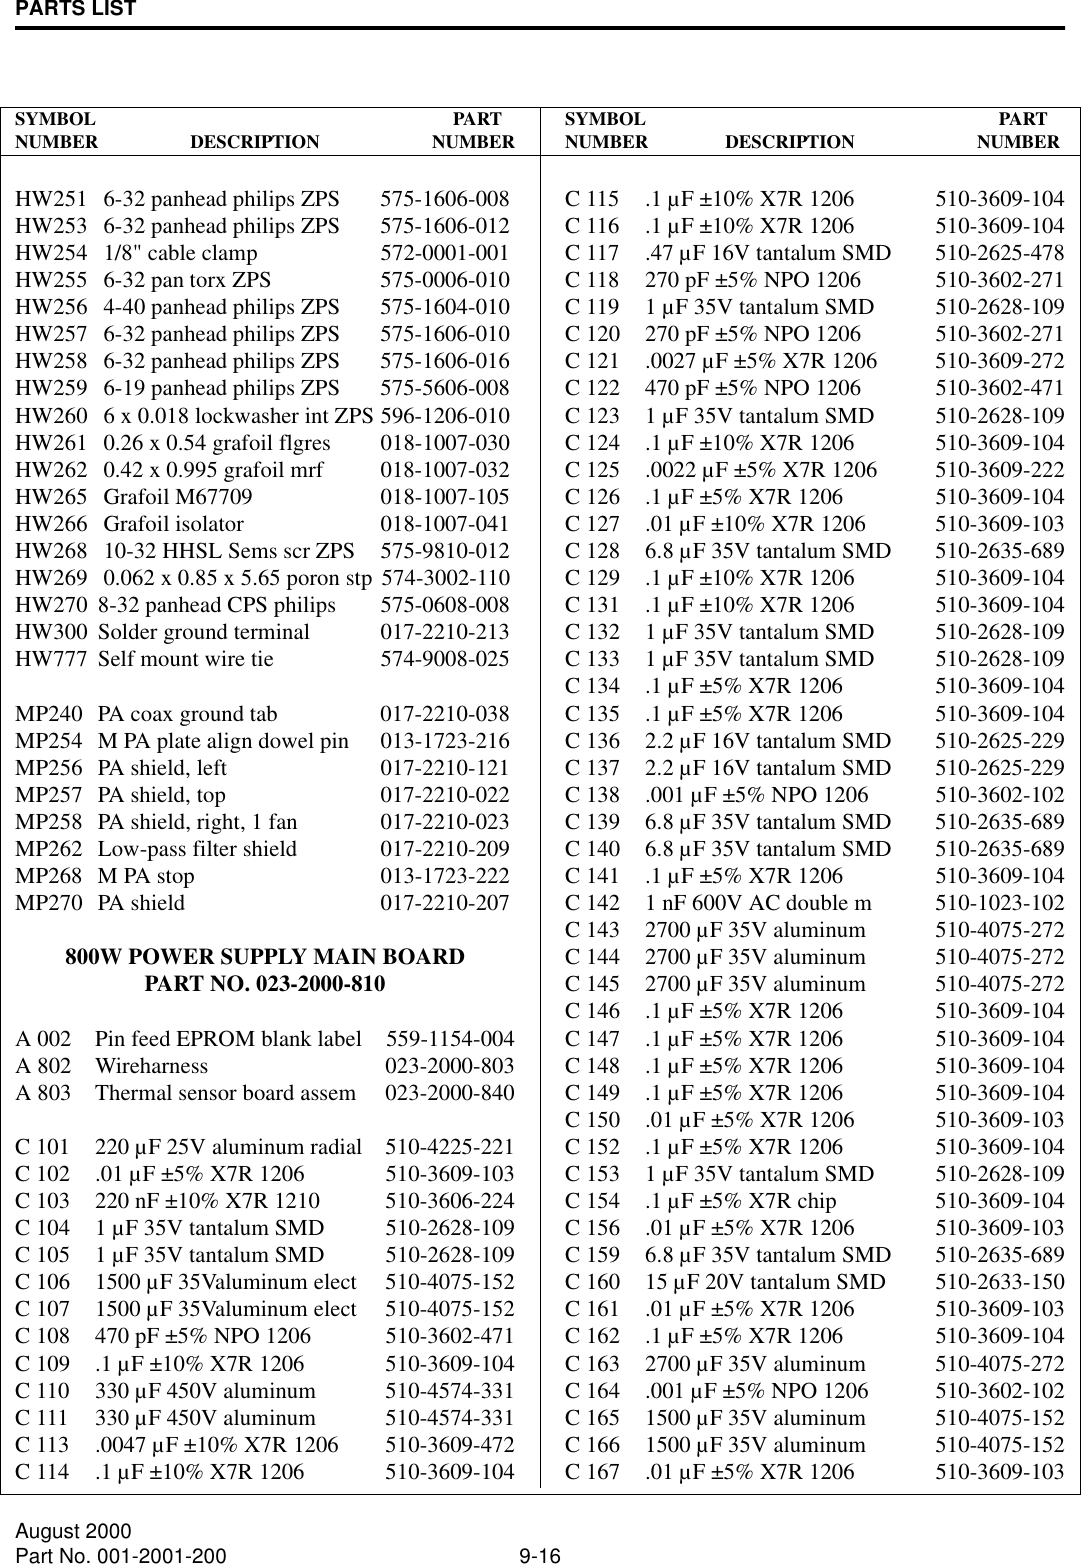 PARTS LIST9-16August 2000Part No. 001-2001-200SY M B O L     P A RT         NUMBER DESCRIPTION NUMBERHW251  6-32 panhead philips ZPS 575-1606-008HW253  6-32 panhead philips ZPS 575-1606-012HW254  1/8&quot; cable clamp 572-0001-001HW255  6-32 pan torx ZPS 575-0006-010HW256  4-40 panhead philips ZPS 575-1604-010HW257  6-32 panhead philips ZPS 575-1606-010HW258  6-32 panhead philips ZPS 575-1606-016HW259  6-19 panhead philips ZPS 575-5606-008HW260  6 x 0.018 lockwasher int ZPS 596-1206-010HW261  0.26 x 0.54 grafoil flgres 018-1007-030HW262  0.42 x 0.995 grafoil mrf 018-1007-032HW265  Grafoil M67709 018-1007-105HW266  Grafoil isolator 018-1007-041HW268  10-32 HHSL Sems scr ZPS 575-9810-012HW269  0.062 x 0.85 x 5.65 poron stp 574-3002-110HW270 8-32 panhead CPS philips 575-0608-008HW300 Solder ground terminal 017-2210-213HW777 Self mount wire tie 574-9008-025MP240 PA coax ground tab 017-2210-038MP254 M PA plate align dowel pin 013-1723-216MP256 PA shield, left 017-2210-121MP257 PA shield, top 017-2210-022MP258 PA shield, right, 1 fan 017-2210-023MP262 Low-pass filter shield 017-2210-209MP268 M PA stop 013-1723-222MP270 PA shield 017-2210-207800W POWER SUPPLY MAIN BOARDPART NO. 023-2000-810A 002 Pin feed EPROM blank label 559-1154-004A 802 Wireharness 023-2000-803A 803 Thermal sensor board assem 023-2000-840C 101 220 µF 25V aluminum radial 510-4225-221C 102 .01 µF ±5% X7R 1206 510-3609-103C 103 220 nF ±10% X7R 1210 510-3606-224C 104 1 µF 35V tantalum SMD 510-2628-109C 105 1 µF 35V tantalum SMD 510-2628-109C 106 1500 µF 35Valuminum elect 510-4075-152C 107 1500 µF 35Valuminum elect 510-4075-152C 108 470 pF ±5% NPO 1206 510-3602-471C 109 .1 µF ±10% X7R 1206 510-3609-104C 110 330 µF 450V aluminum 510-4574-331C 111 330 µF 450V aluminum 510-4574-331C 113 .0047 µF ±10% X7R 1206 510-3609-472C 114 .1 µF ±10% X7R 1206 510-3609-104SYMBOL        PART    NUMBER DESCRIPTION NUMBERC 115 .1 µF ±10% X7R 1206 510-3609-104C 116 .1 µF ±10% X7R 1206 510-3609-104C 117 .47 µF 16V tantalum SMD 510-2625-478C 118 270 pF ±5% NPO 1206 510-3602-271C 119 1 µF 35V tantalum SMD 510-2628-109C 120 270 pF ±5% NPO 1206 510-3602-271C 121 .0027 µF ±5% X7R 1206 510-3609-272C 122 470 pF ±5% NPO 1206 510-3602-471C 123 1 µF 35V tantalum SMD 510-2628-109C 124 .1 µF ±10% X7R 1206 510-3609-104C 125 .0022 µF ±5% X7R 1206 510-3609-222C 126 .1 µF ±5% X7R 1206 510-3609-104C 127 .01 µF ±10% X7R 1206 510-3609-103C 128 6.8 µF 35V tantalum SMD 510-2635-689C 129 .1 µF ±10% X7R 1206 510-3609-104C 131 .1 µF ±10% X7R 1206 510-3609-104C 132 1 µF 35V tantalum SMD 510-2628-109C 133 1 µF 35V tantalum SMD 510-2628-109C 134 .1 µF ±5% X7R 1206 510-3609-104C 135 .1 µF ±5% X7R 1206 510-3609-104C 136 2.2 µF 16V tantalum SMD 510-2625-229C 137 2.2 µF 16V tantalum SMD 510-2625-229C 138 .001 µF ±5% NPO 1206 510-3602-102C 139 6.8 µF 35V tantalum SMD 510-2635-689C 140 6.8 µF 35V tantalum SMD 510-2635-689C 141 .1 µF ±5% X7R 1206 510-3609-104C 142 1 nF 600V AC double m 510-1023-102C 143 2700 µF 35V aluminum 510-4075-272C 144 2700 µF 35V aluminum 510-4075-272C 145 2700 µF 35V aluminum 510-4075-272C 146 .1 µF ±5% X7R 1206 510-3609-104C 147 .1 µF ±5% X7R 1206 510-3609-104C 148 .1 µF ±5% X7R 1206 510-3609-104C 149 .1 µF ±5% X7R 1206 510-3609-104C 150 .01 µF ±5% X7R 1206 510-3609-103C 152 .1 µF ±5% X7R 1206 510-3609-104C 153 1 µF 35V tantalum SMD 510-2628-109C 154 .1 µF ±5% X7R chip 510-3609-104C 156 .01 µF ±5% X7R 1206 510-3609-103C 159 6.8 µF 35V tantalum SMD 510-2635-689C 160 15 µF 20V tantalum SMD 510-2633-150C 161 .01 µF ±5% X7R 1206 510-3609-103C 162 .1 µF ±5% X7R 1206 510-3609-104C 163 2700 µF 35V aluminum 510-4075-272C 164 .001 µF ±5% NPO 1206 510-3602-102C 165 1500 µF 35V aluminum 510-4075-152C 166 1500 µF 35V aluminum 510-4075-152C 167 .01 µF ±5% X7R 1206 510-3609-103